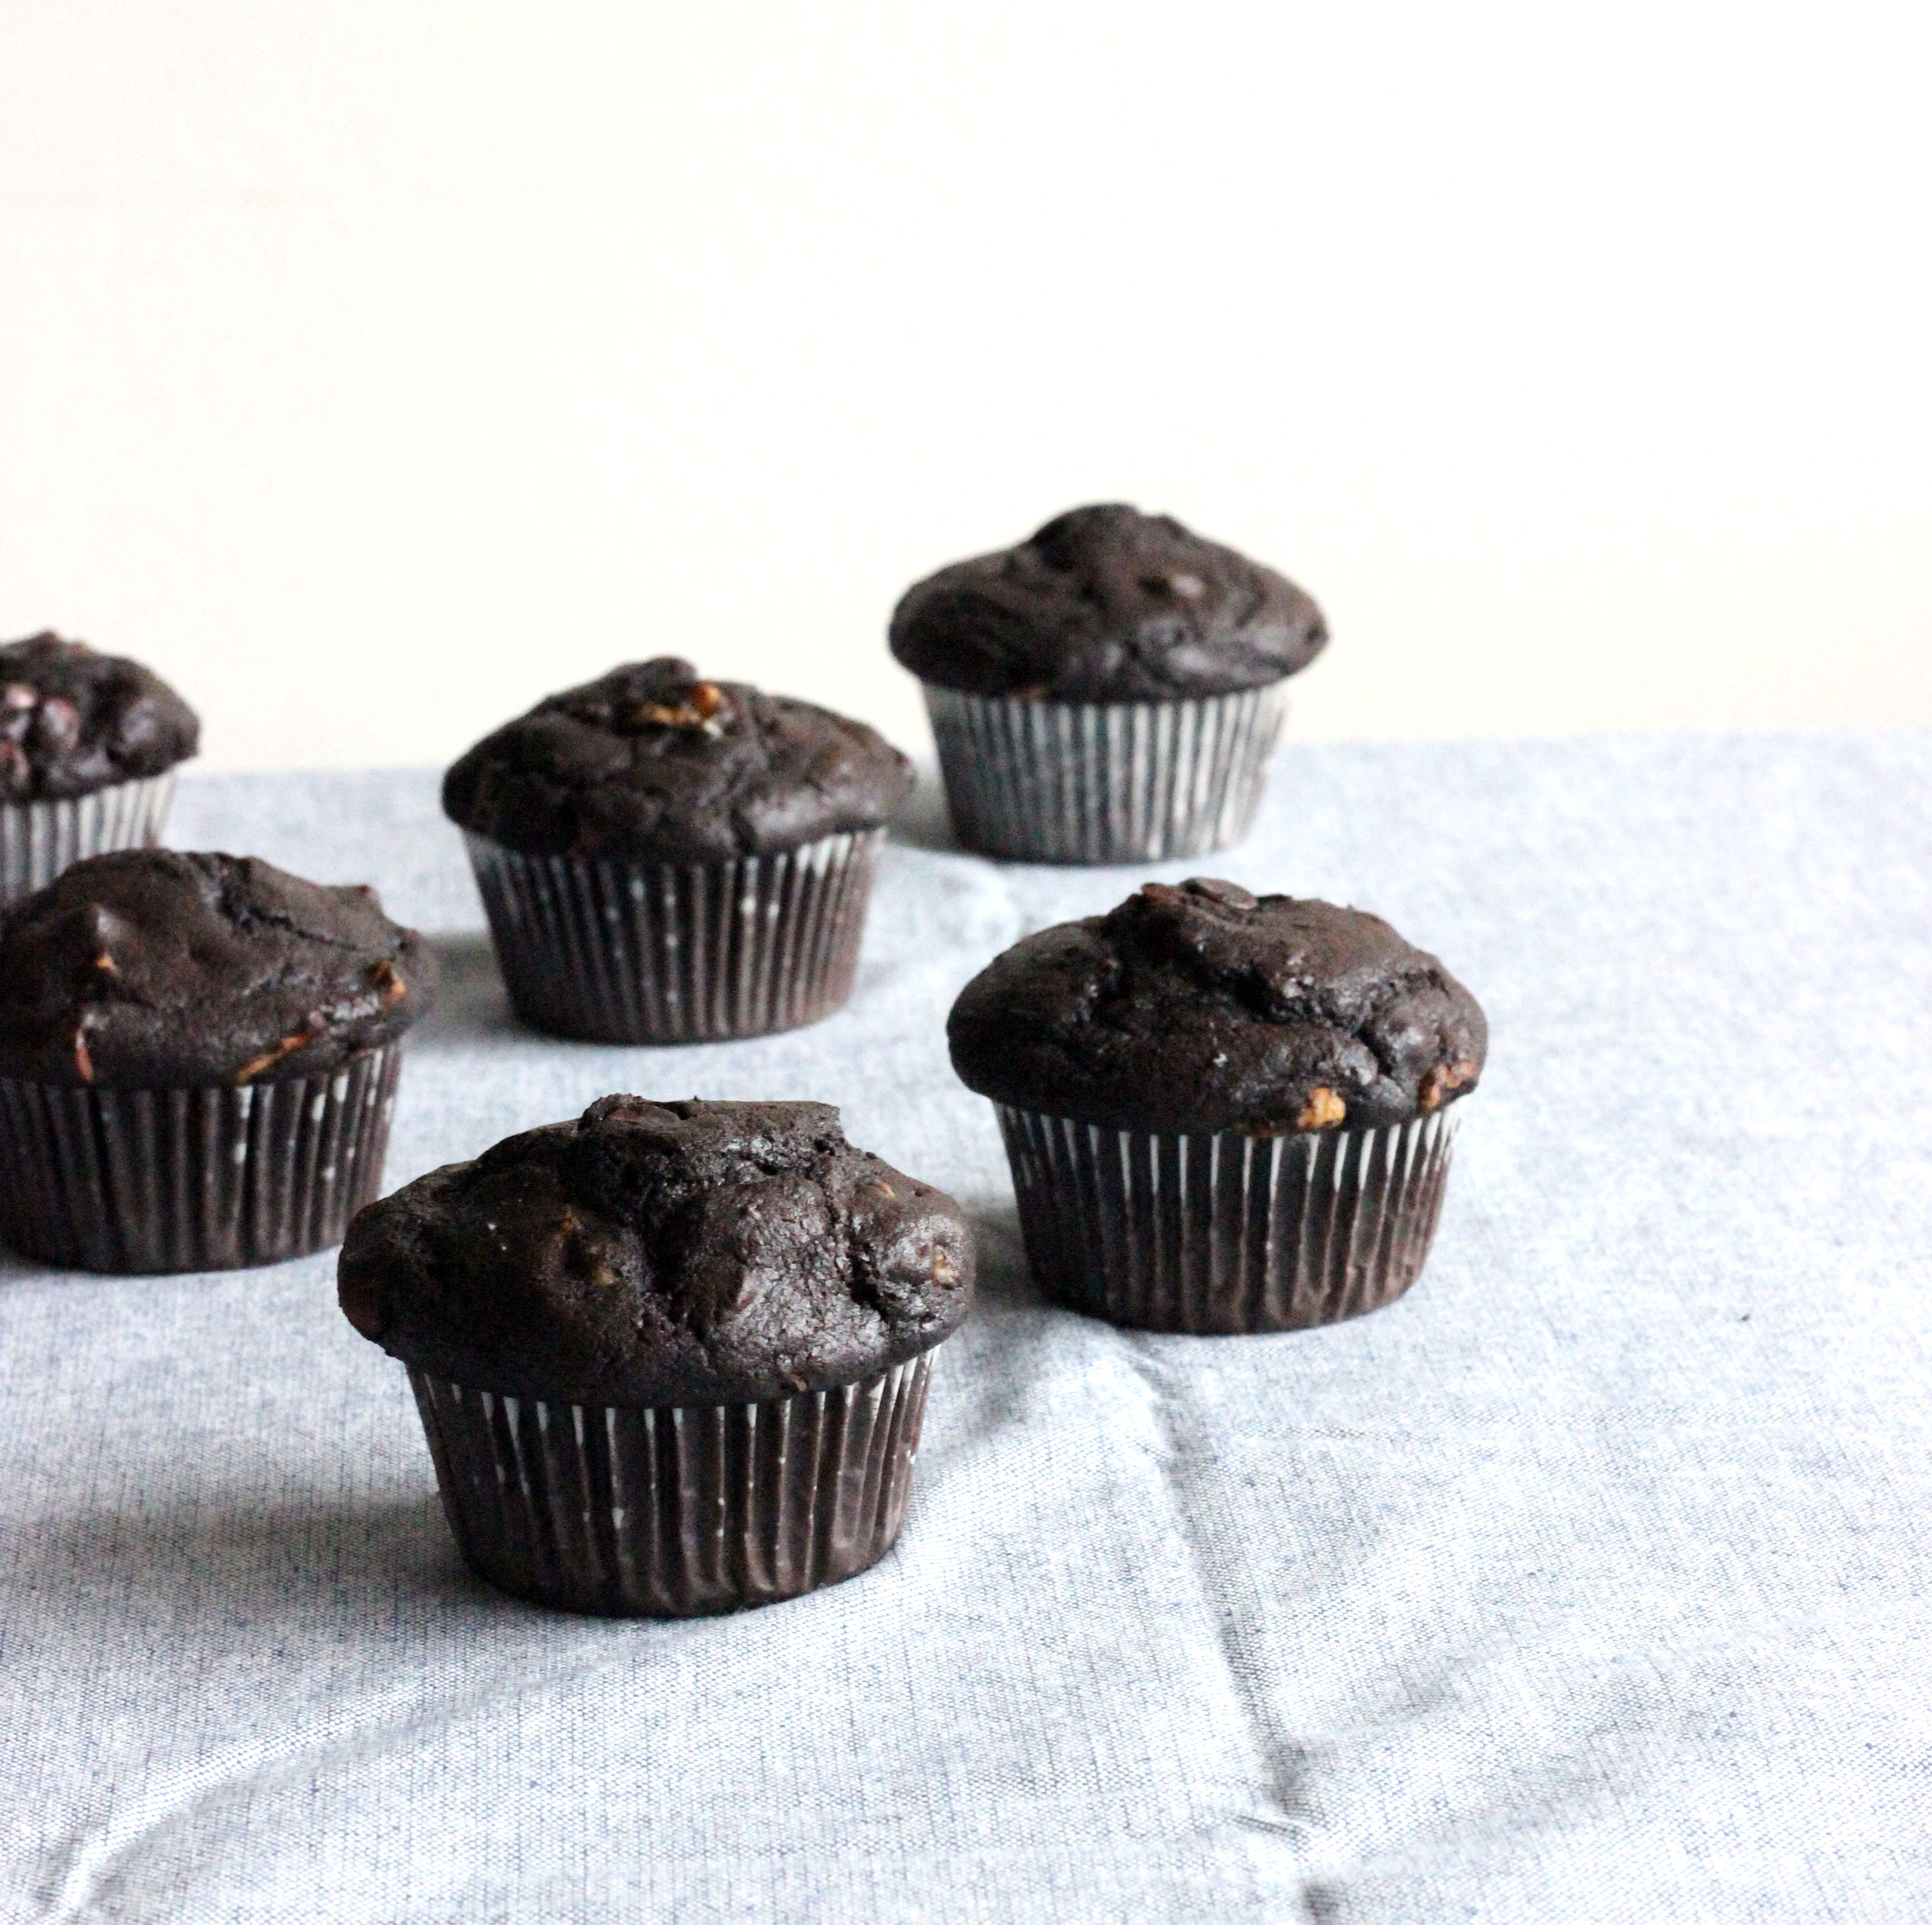 Chocolate Espresso Muffins with Toasted Walnuts - The Bay Leaf Kitchen